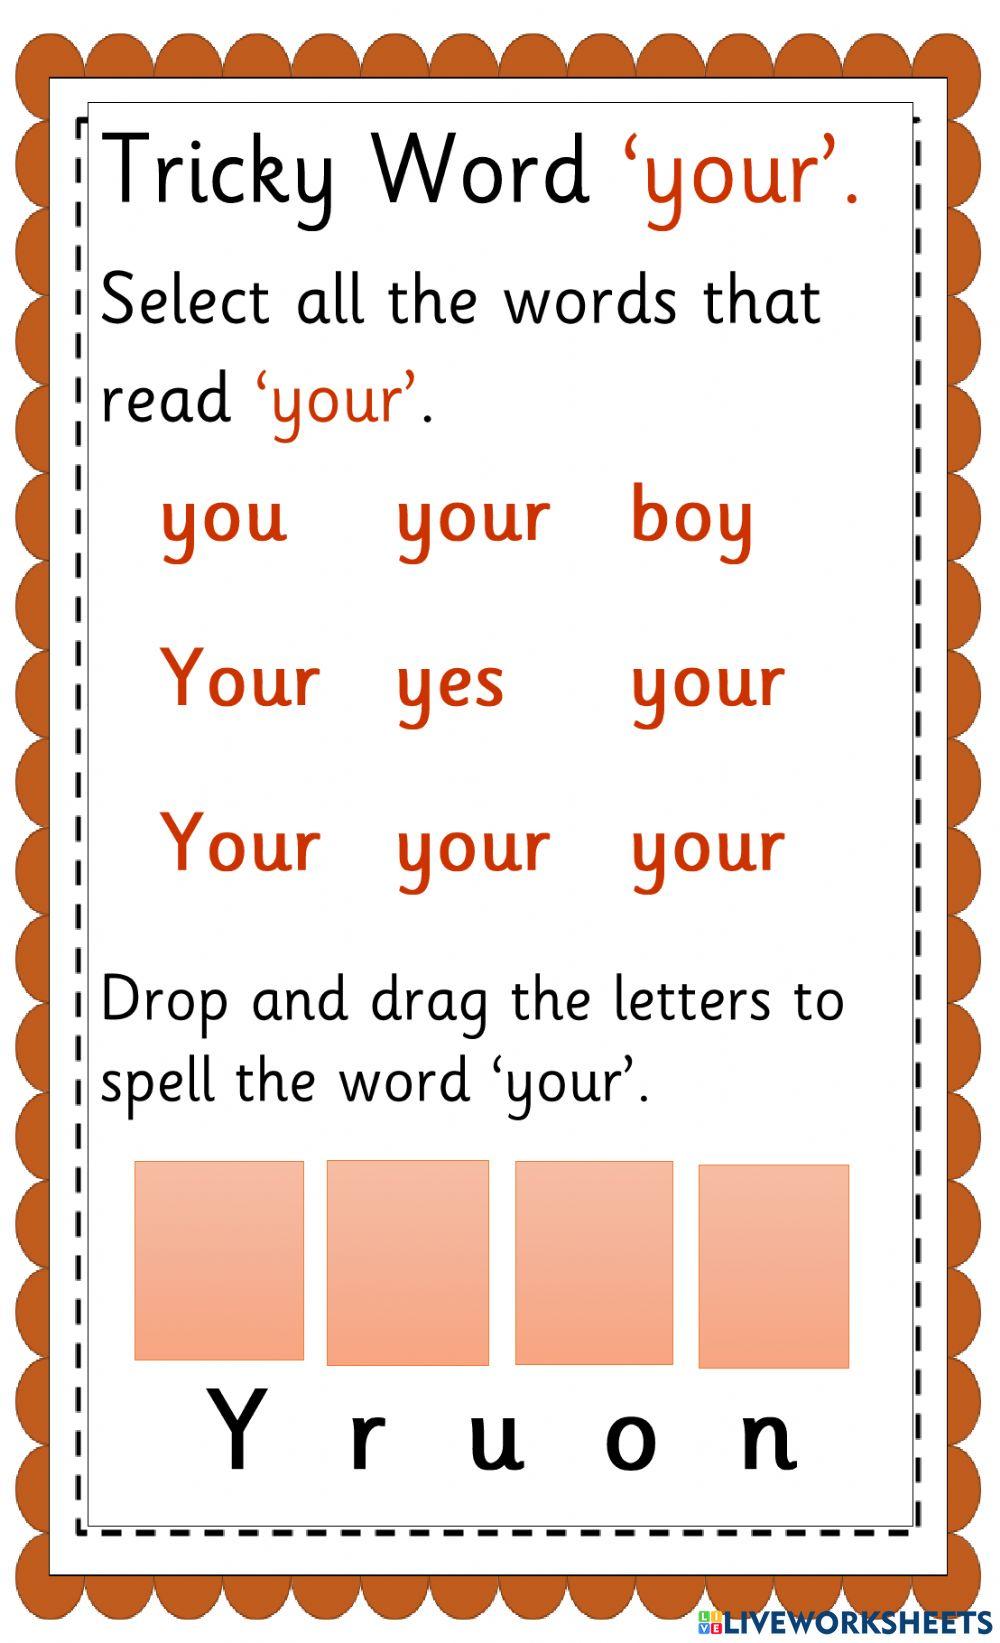 Tricky Word - Your